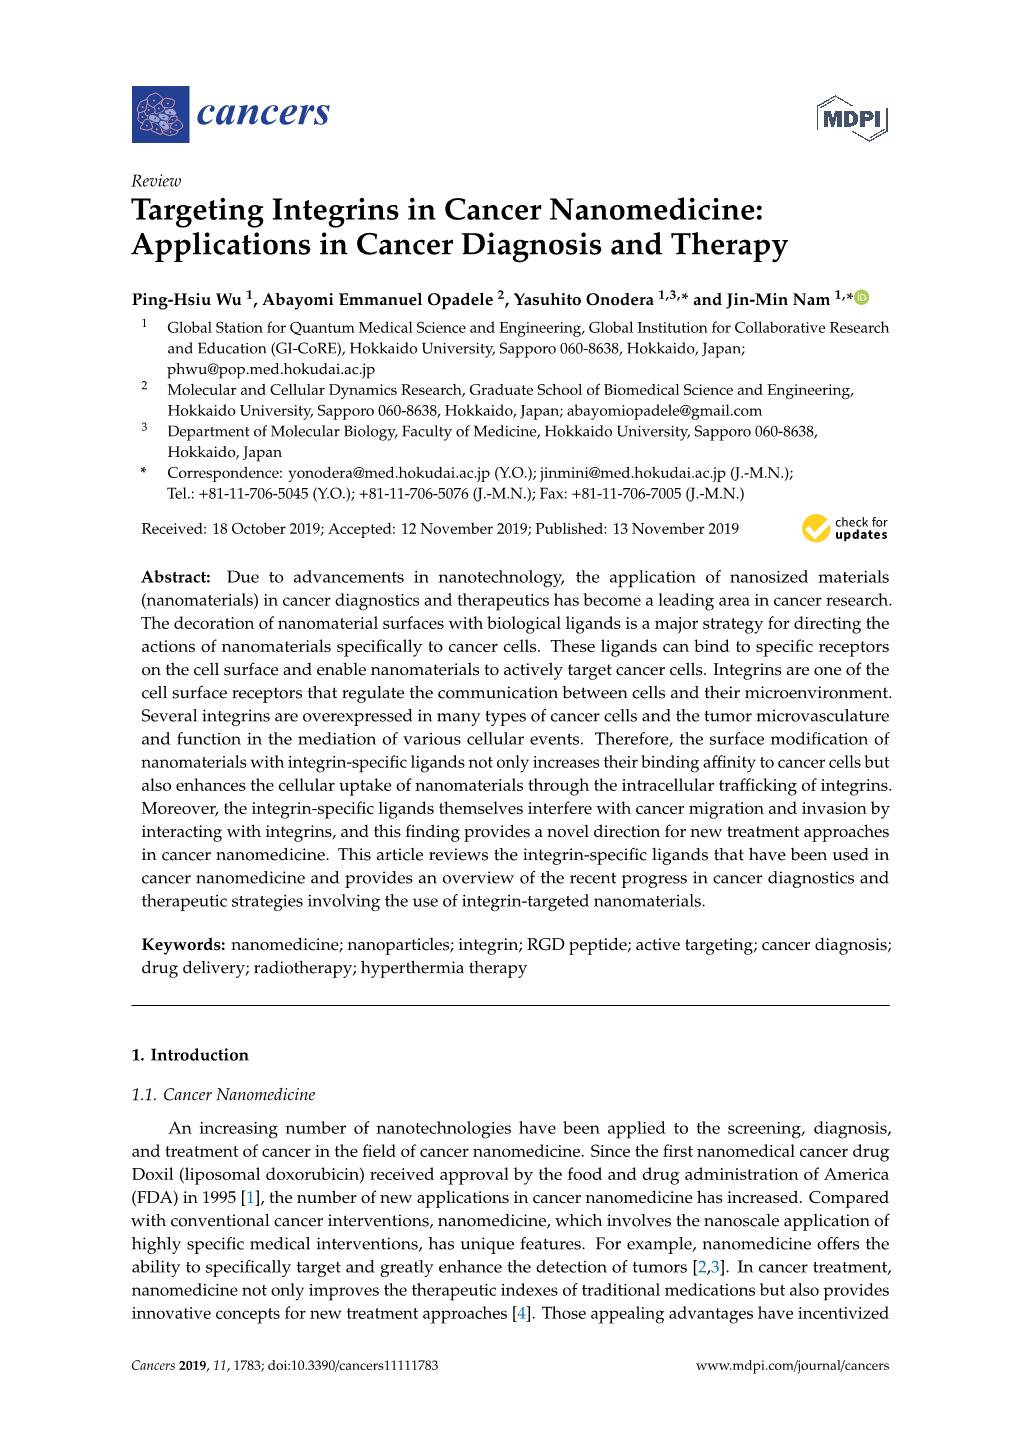 Targeting Integrins in Cancer Nanomedicine: Applications in Cancer Diagnosis and Therapy